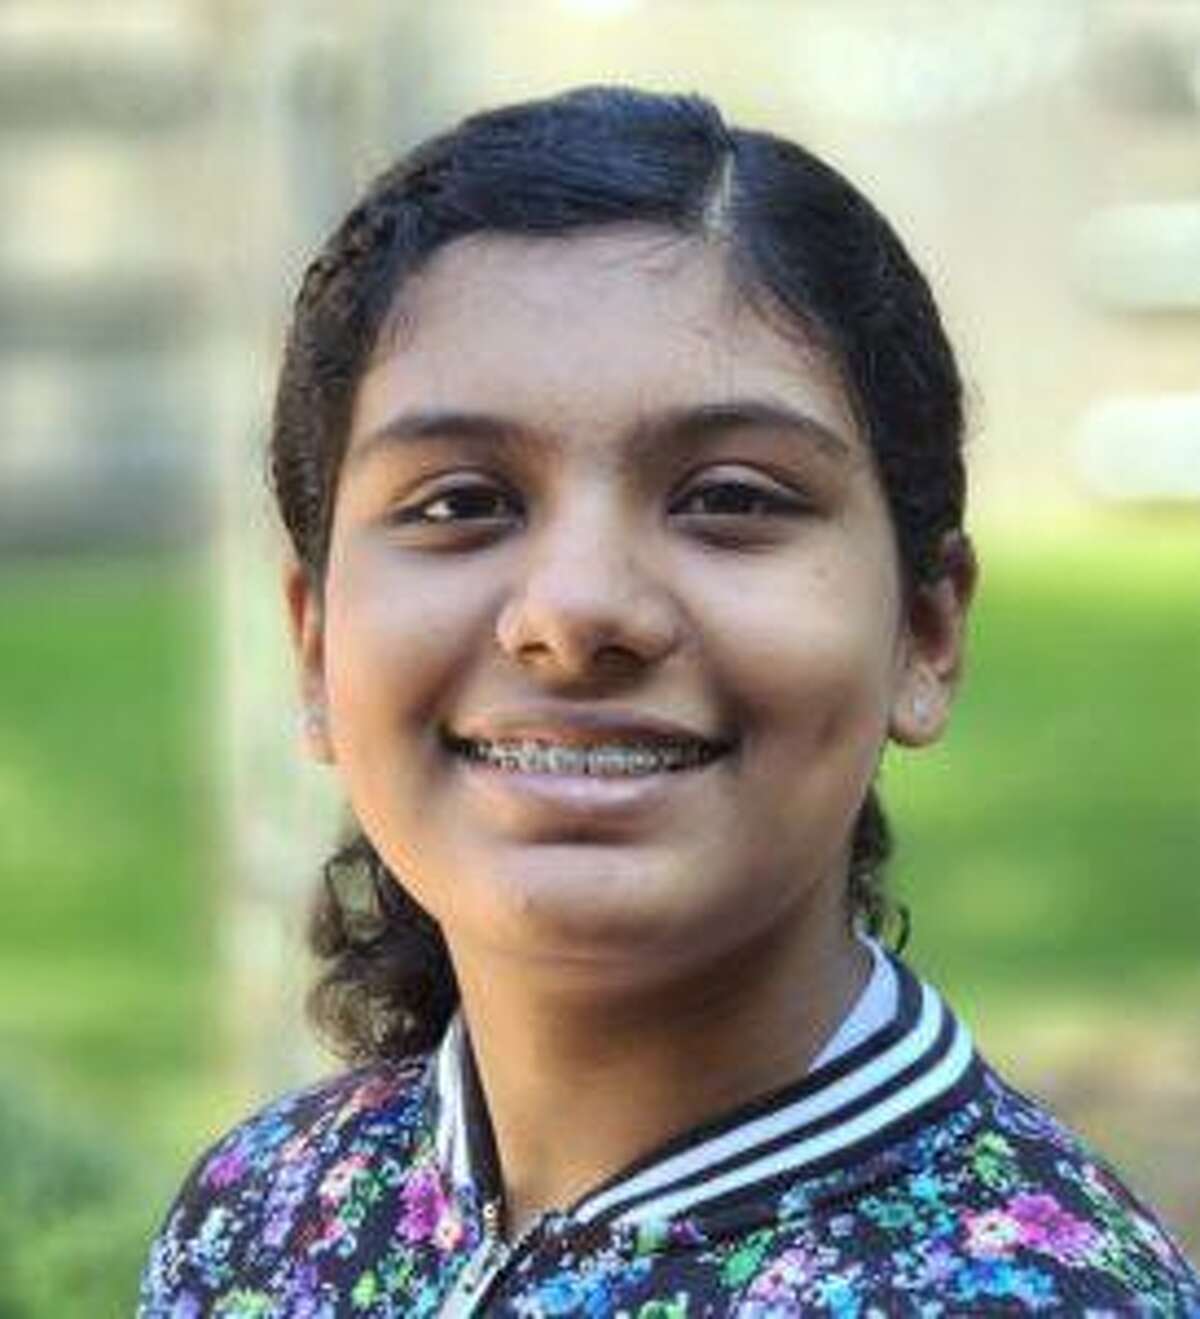 After creating an app to help food deliveries to seniors vulnerable to COVID-19, Missouri City-resident Tavishi Sinha, 12, a student at Quail Valley Middle School, was recently recognized by Congressman Pete Olson as the winner of the 2020 Congressional App Challenge.